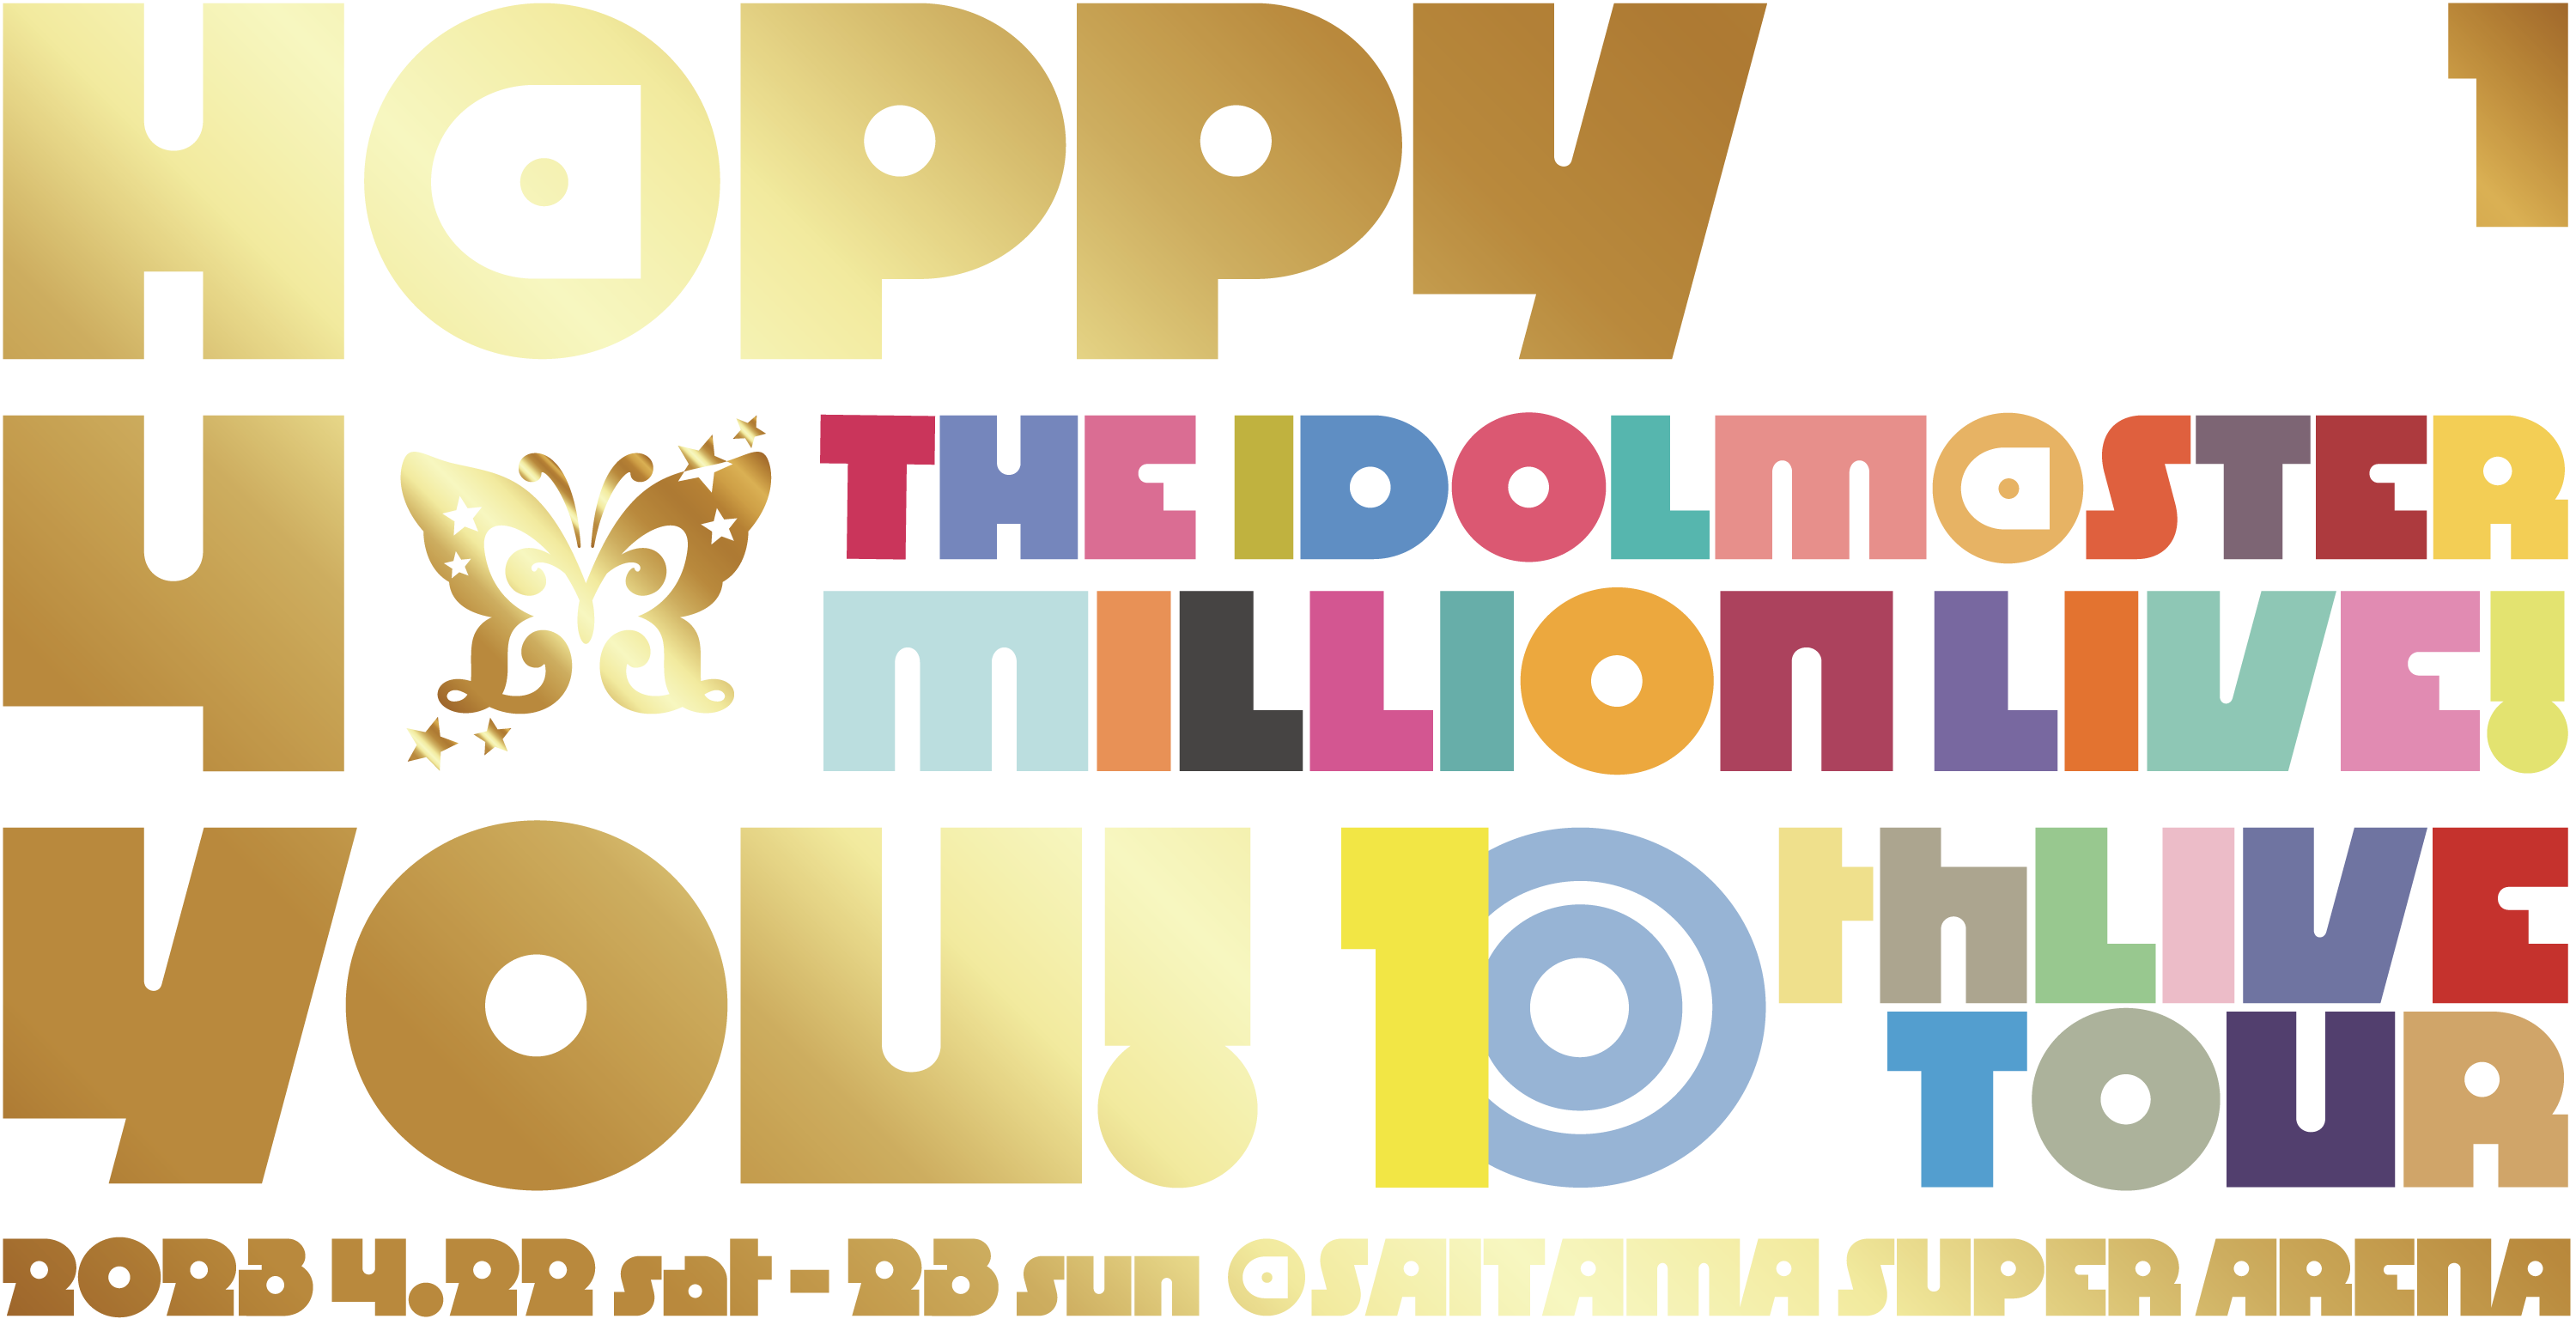 THE IDOLM@STER MILLION LIVE! 10thLIVE TOUR Act-1 H@PPY 4 YOU!